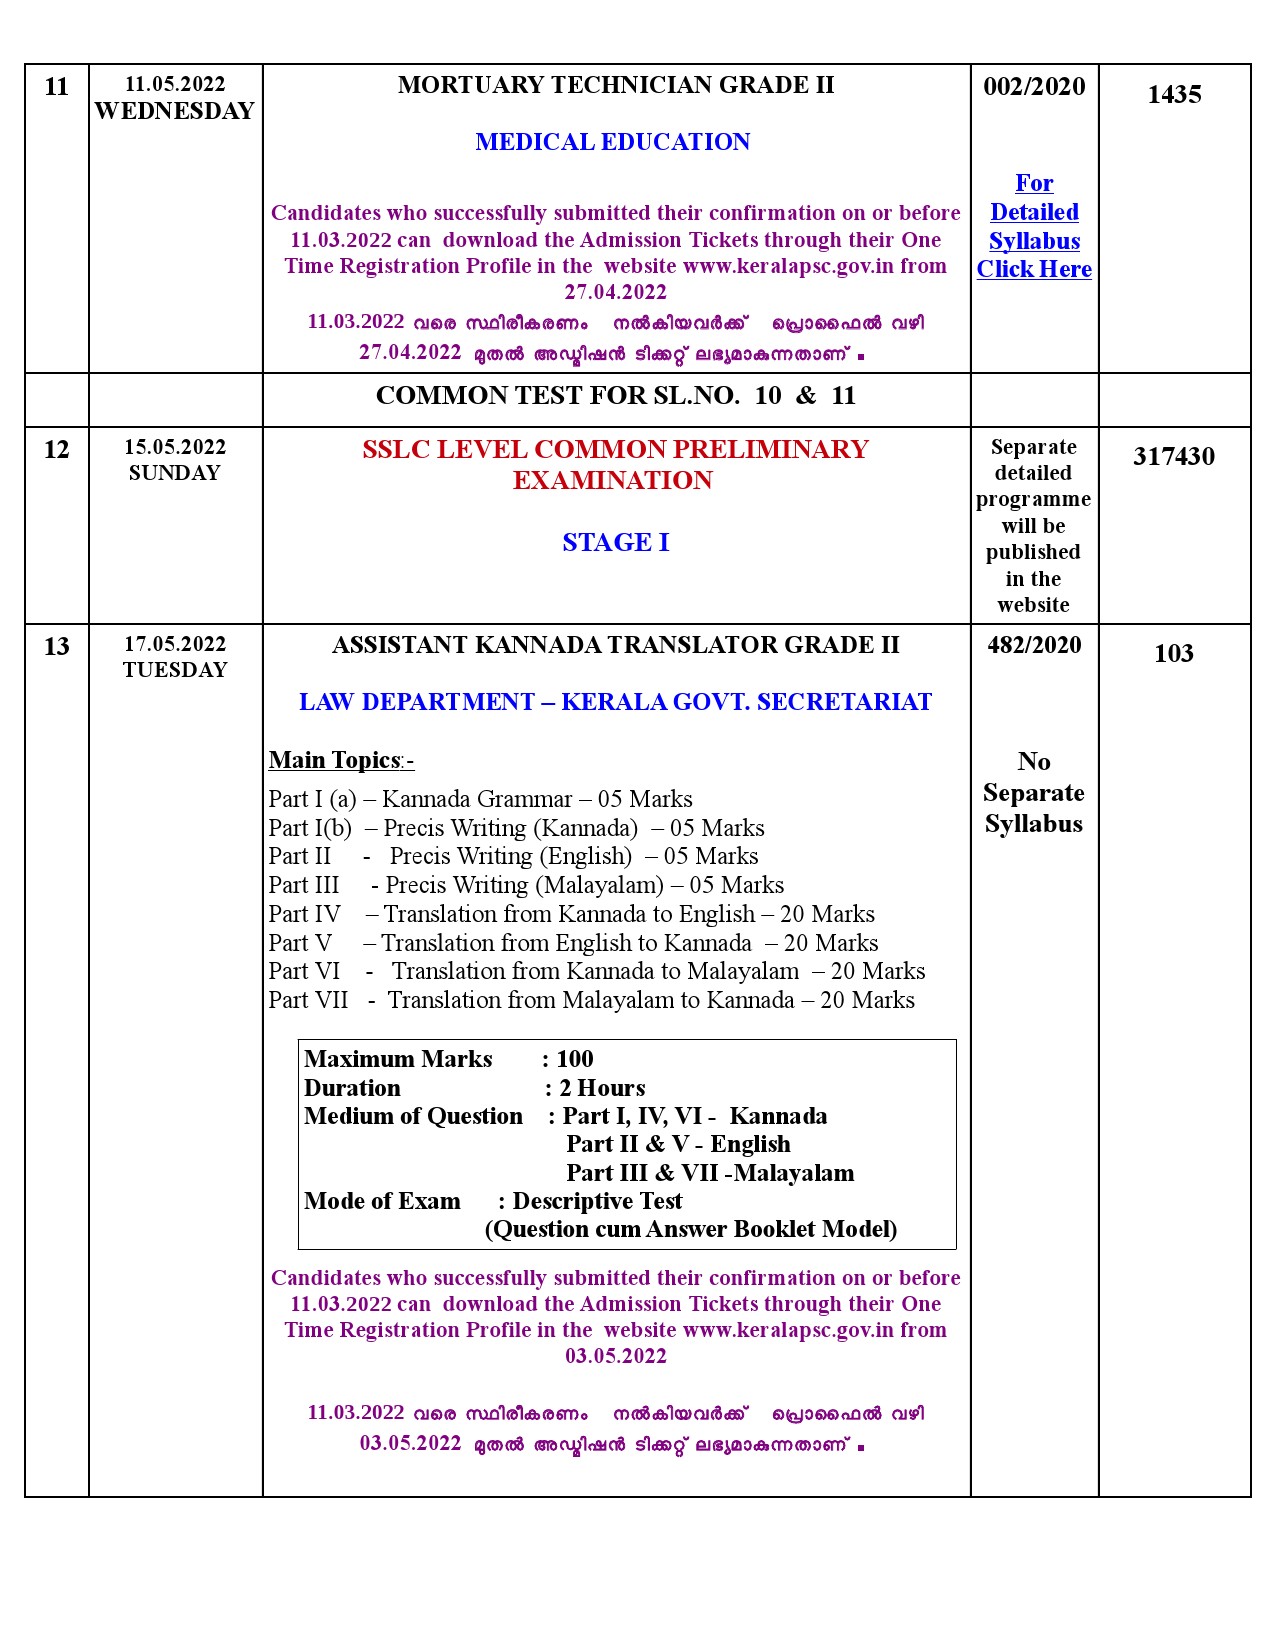 KPSC EXAMINATION PROGRAMME FOR THE MONTH OF MAY 2022 - Notification Image 6